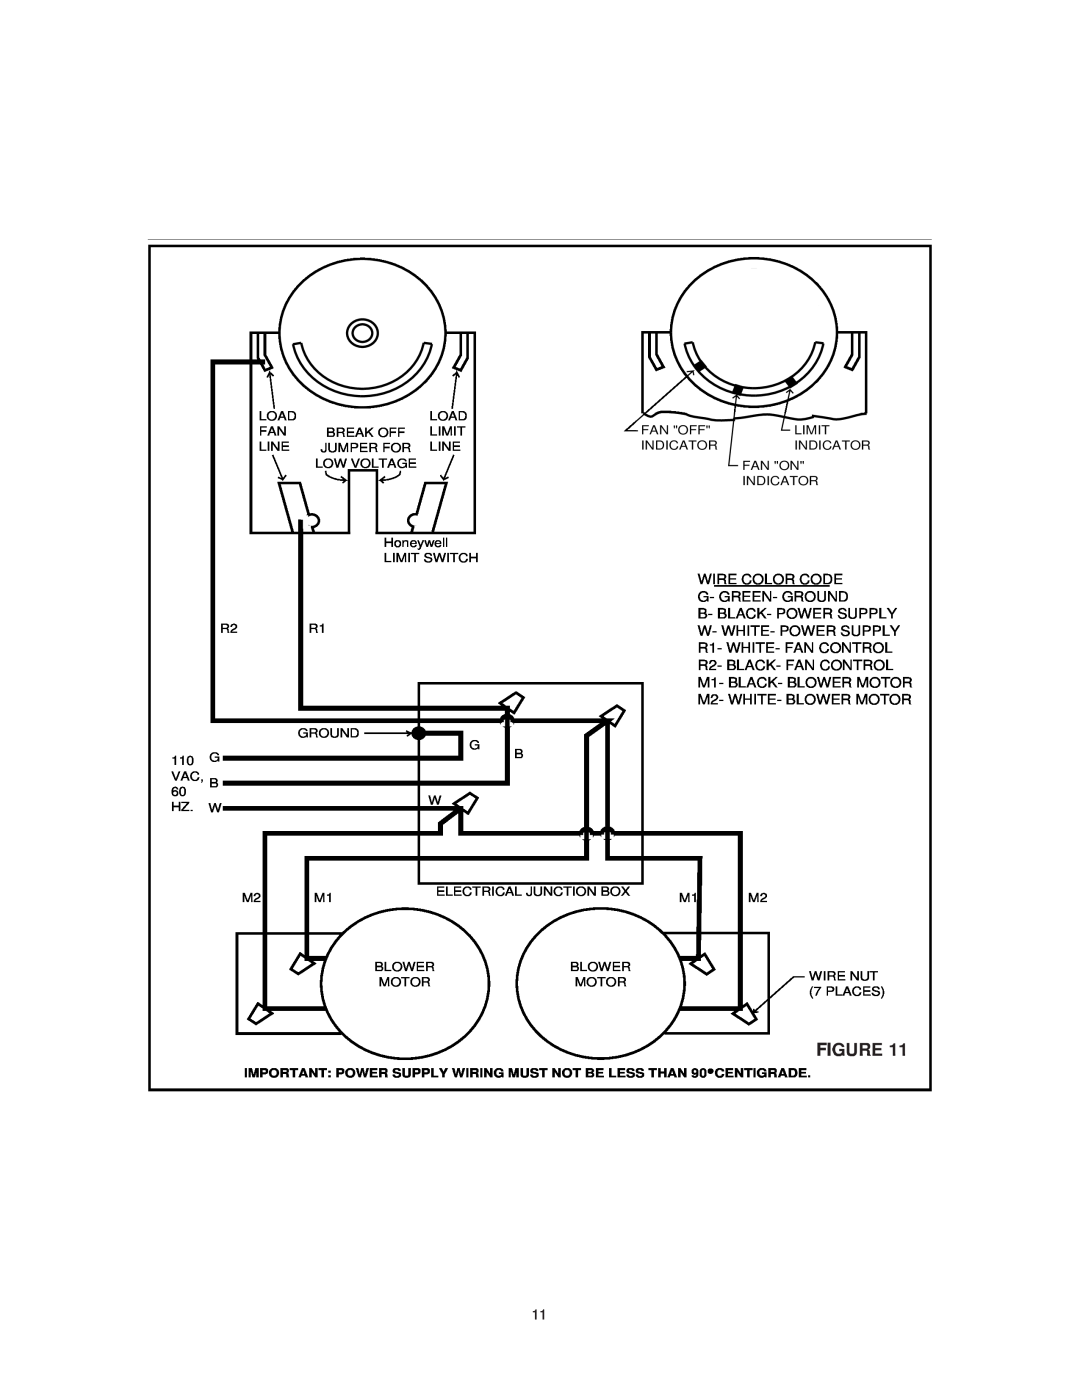 United States Stove 1537G owner manual Wire Color Code G- Green- Ground, R2- BLACK- FAN CONTROL M1- BLACK- BLOWER MOTOR 